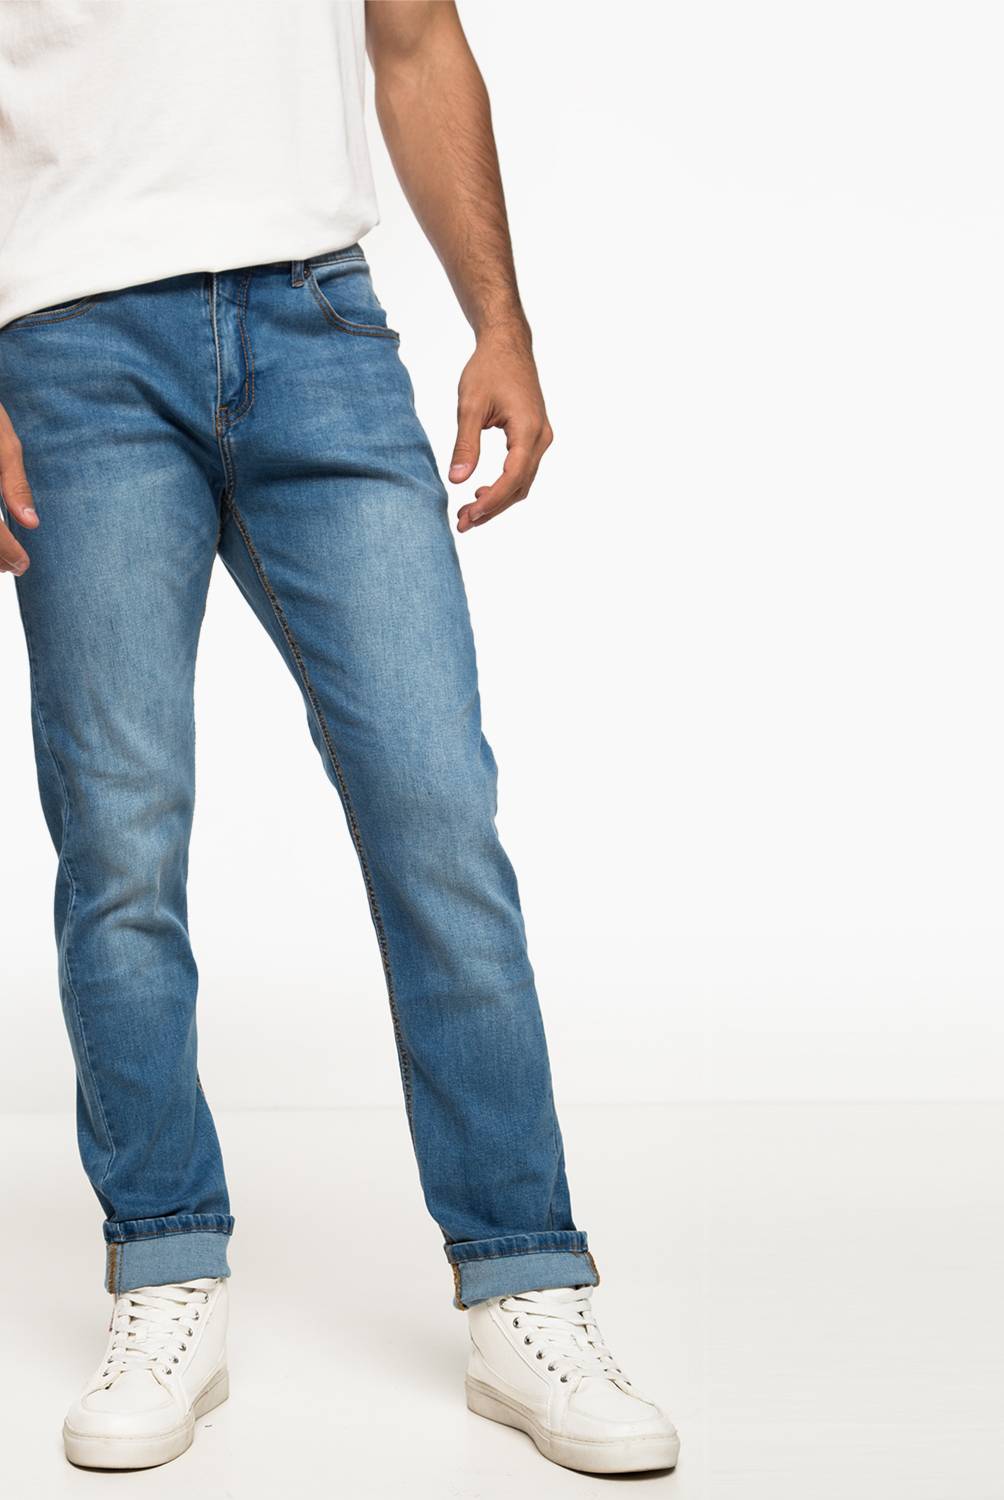 Bearcliff - Jeans Casual Slim Fit